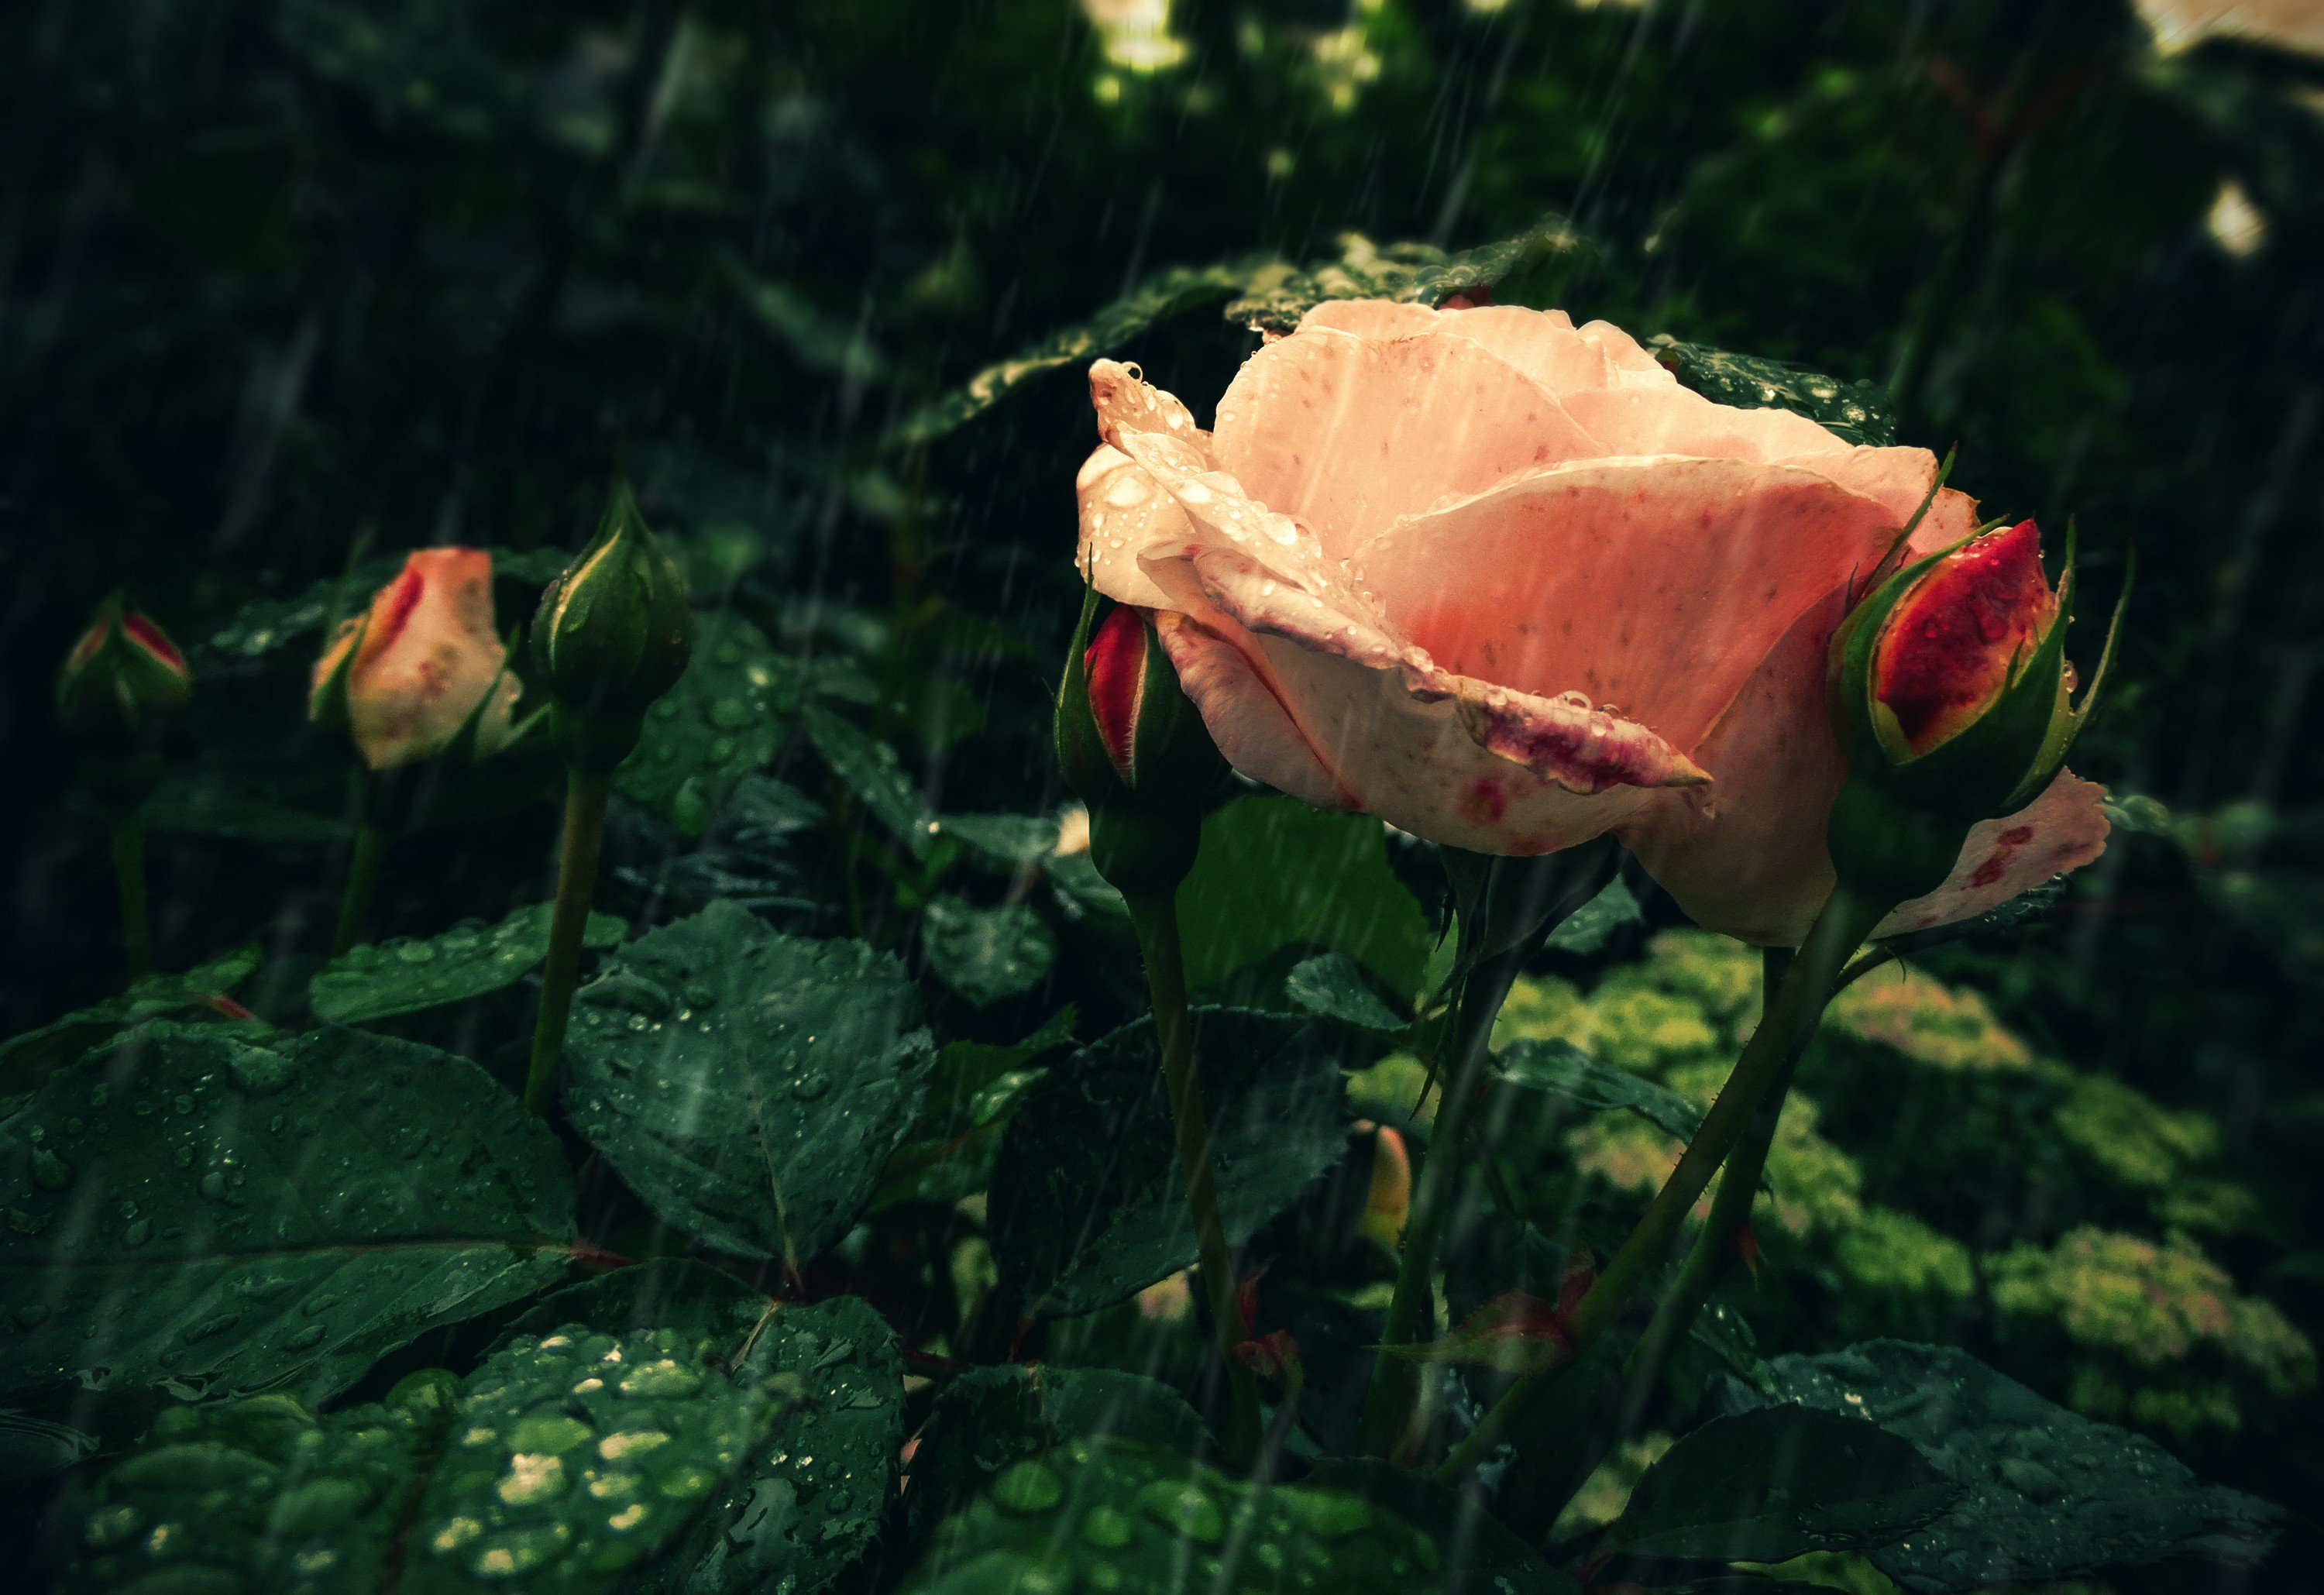 Mobile wallpaper Nature Flowers Rain Flower Close Up Earth Pink  Flower 408247 download the picture for free